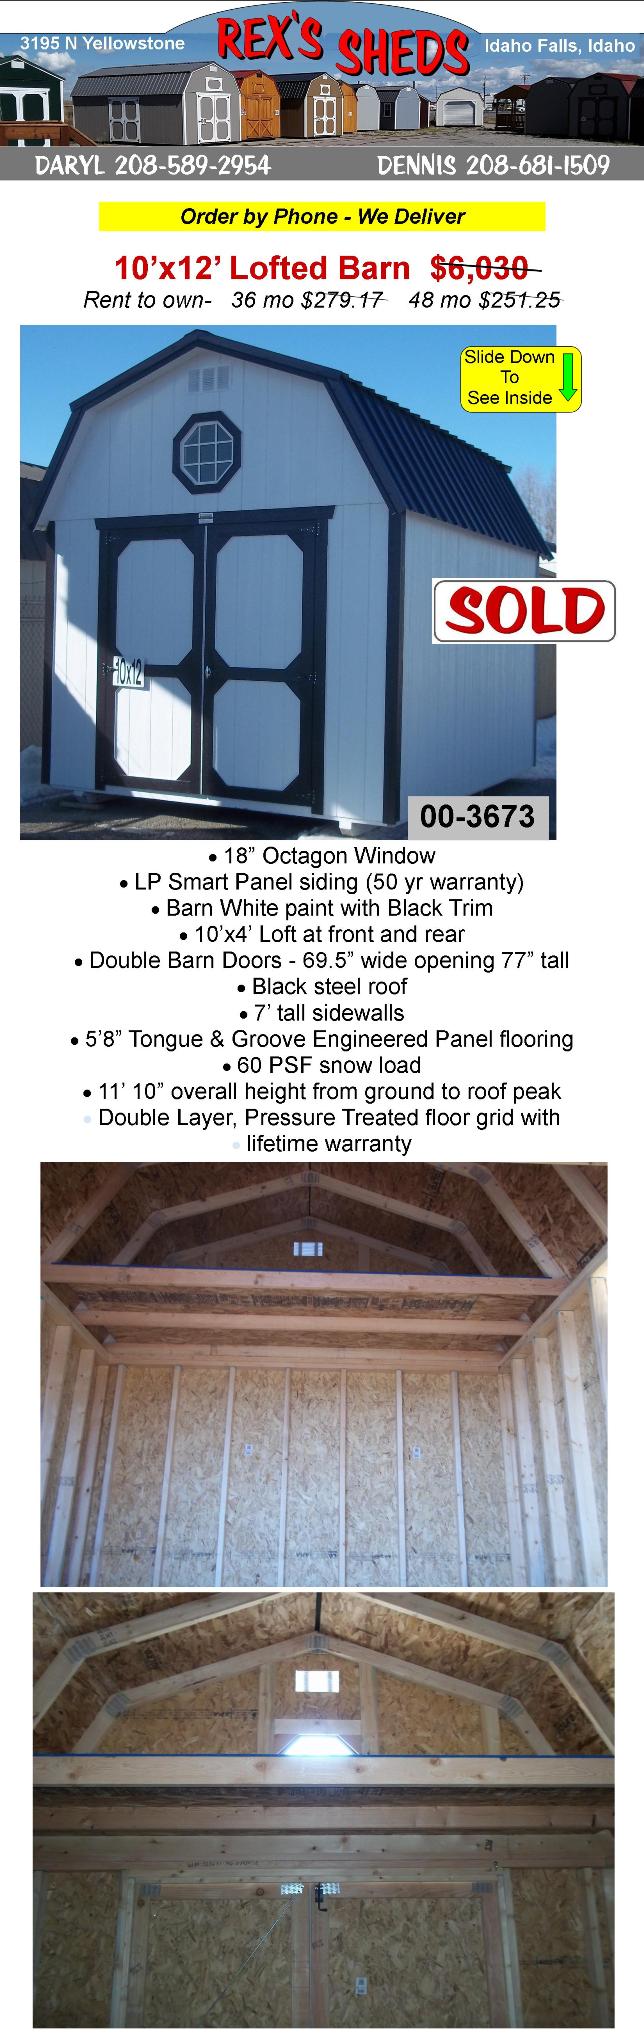 barn_white_barn_shed_with_black_trim_double_barn_doors_overhead_loft_at_front_and_rear_and_black_steel_roof